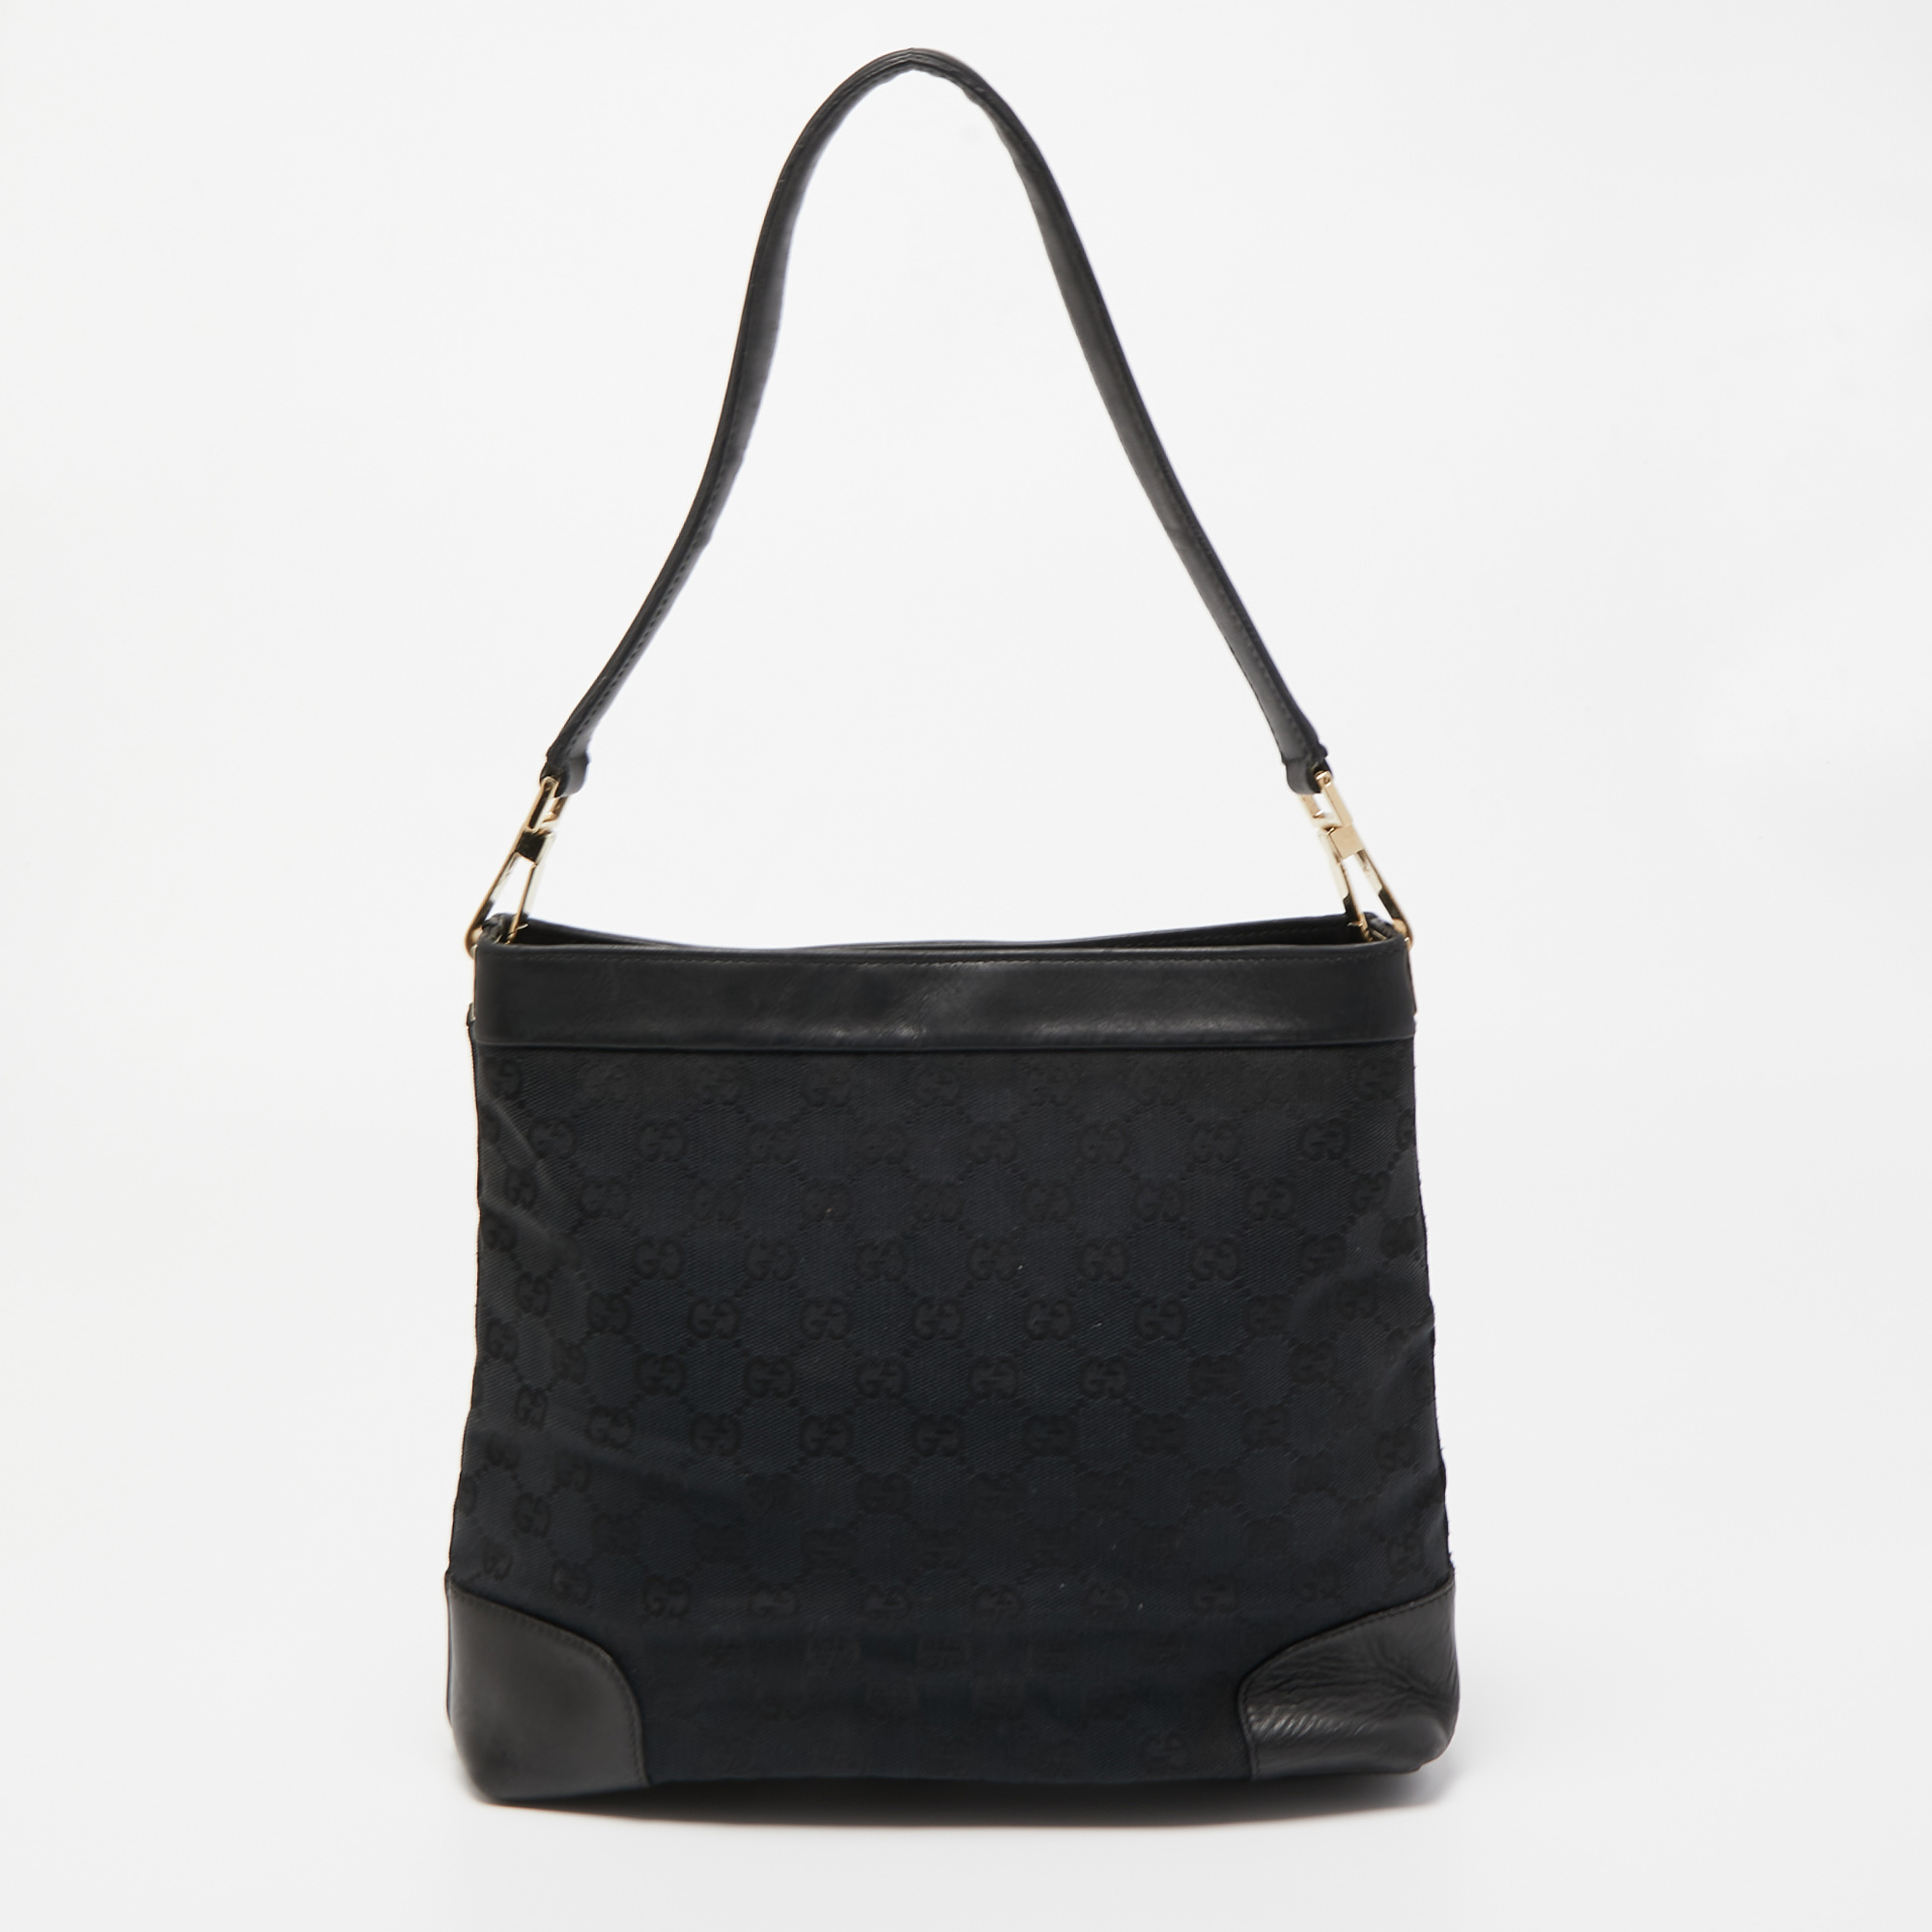 Gucci Black GG Canvas And Leather Shoulder Bag